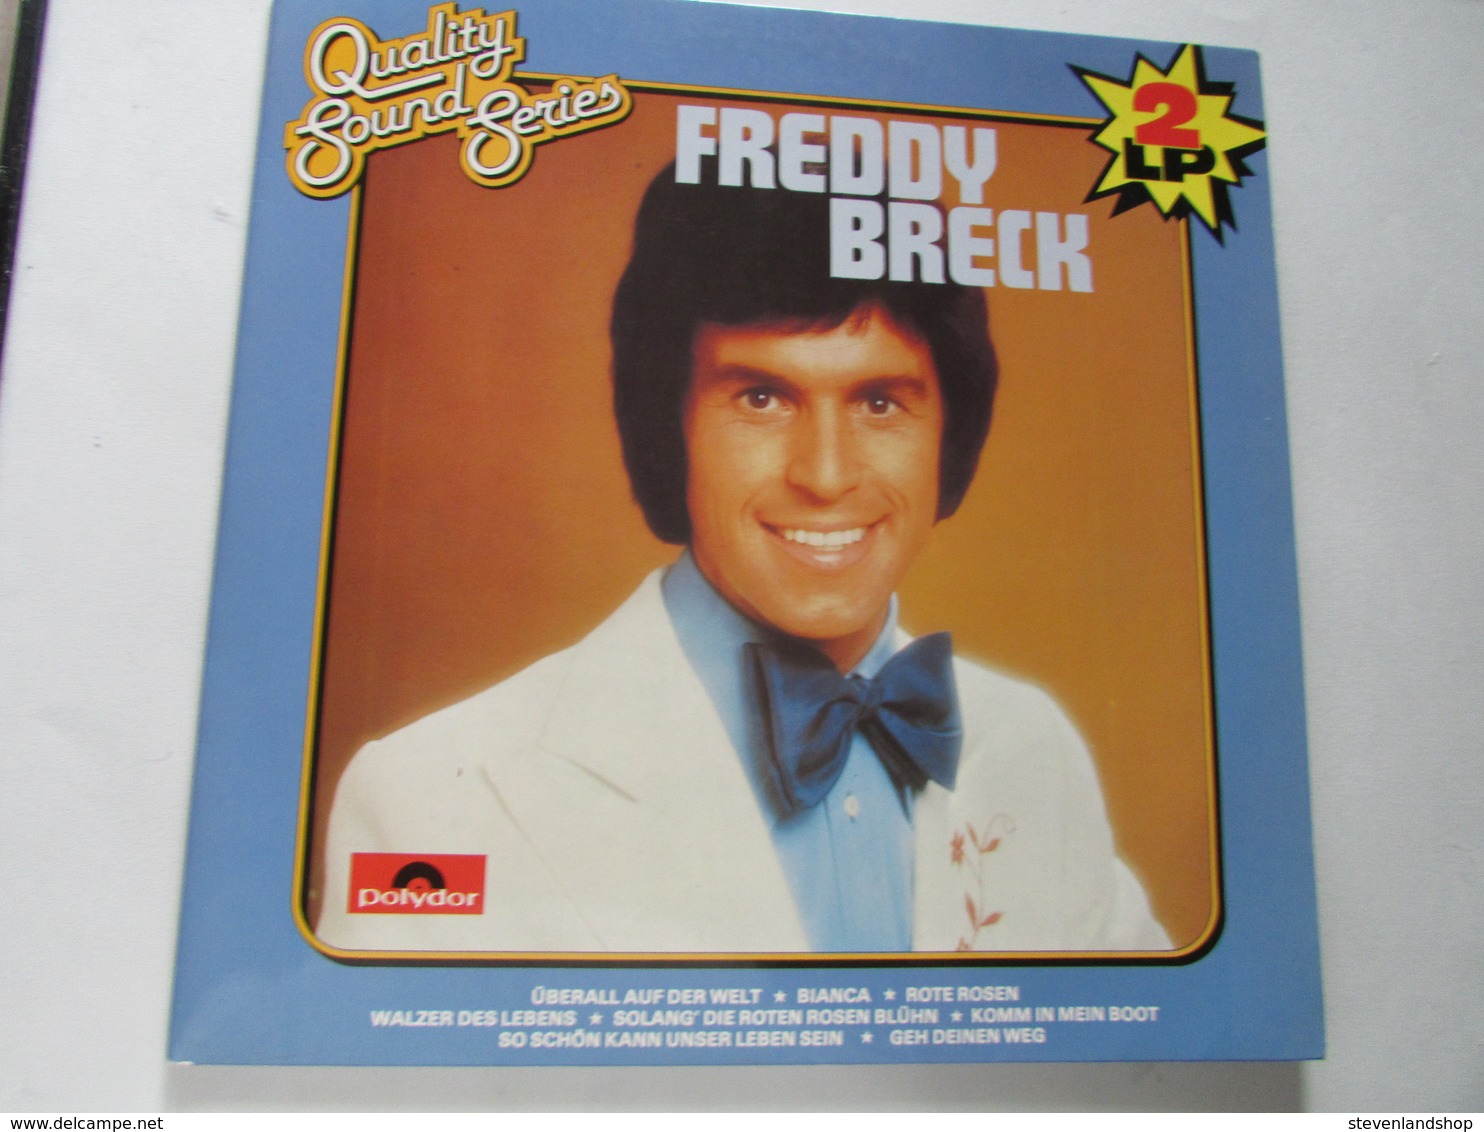 Freddy Breck, 2 LP 'S Quality Sound Series - Other - German Music